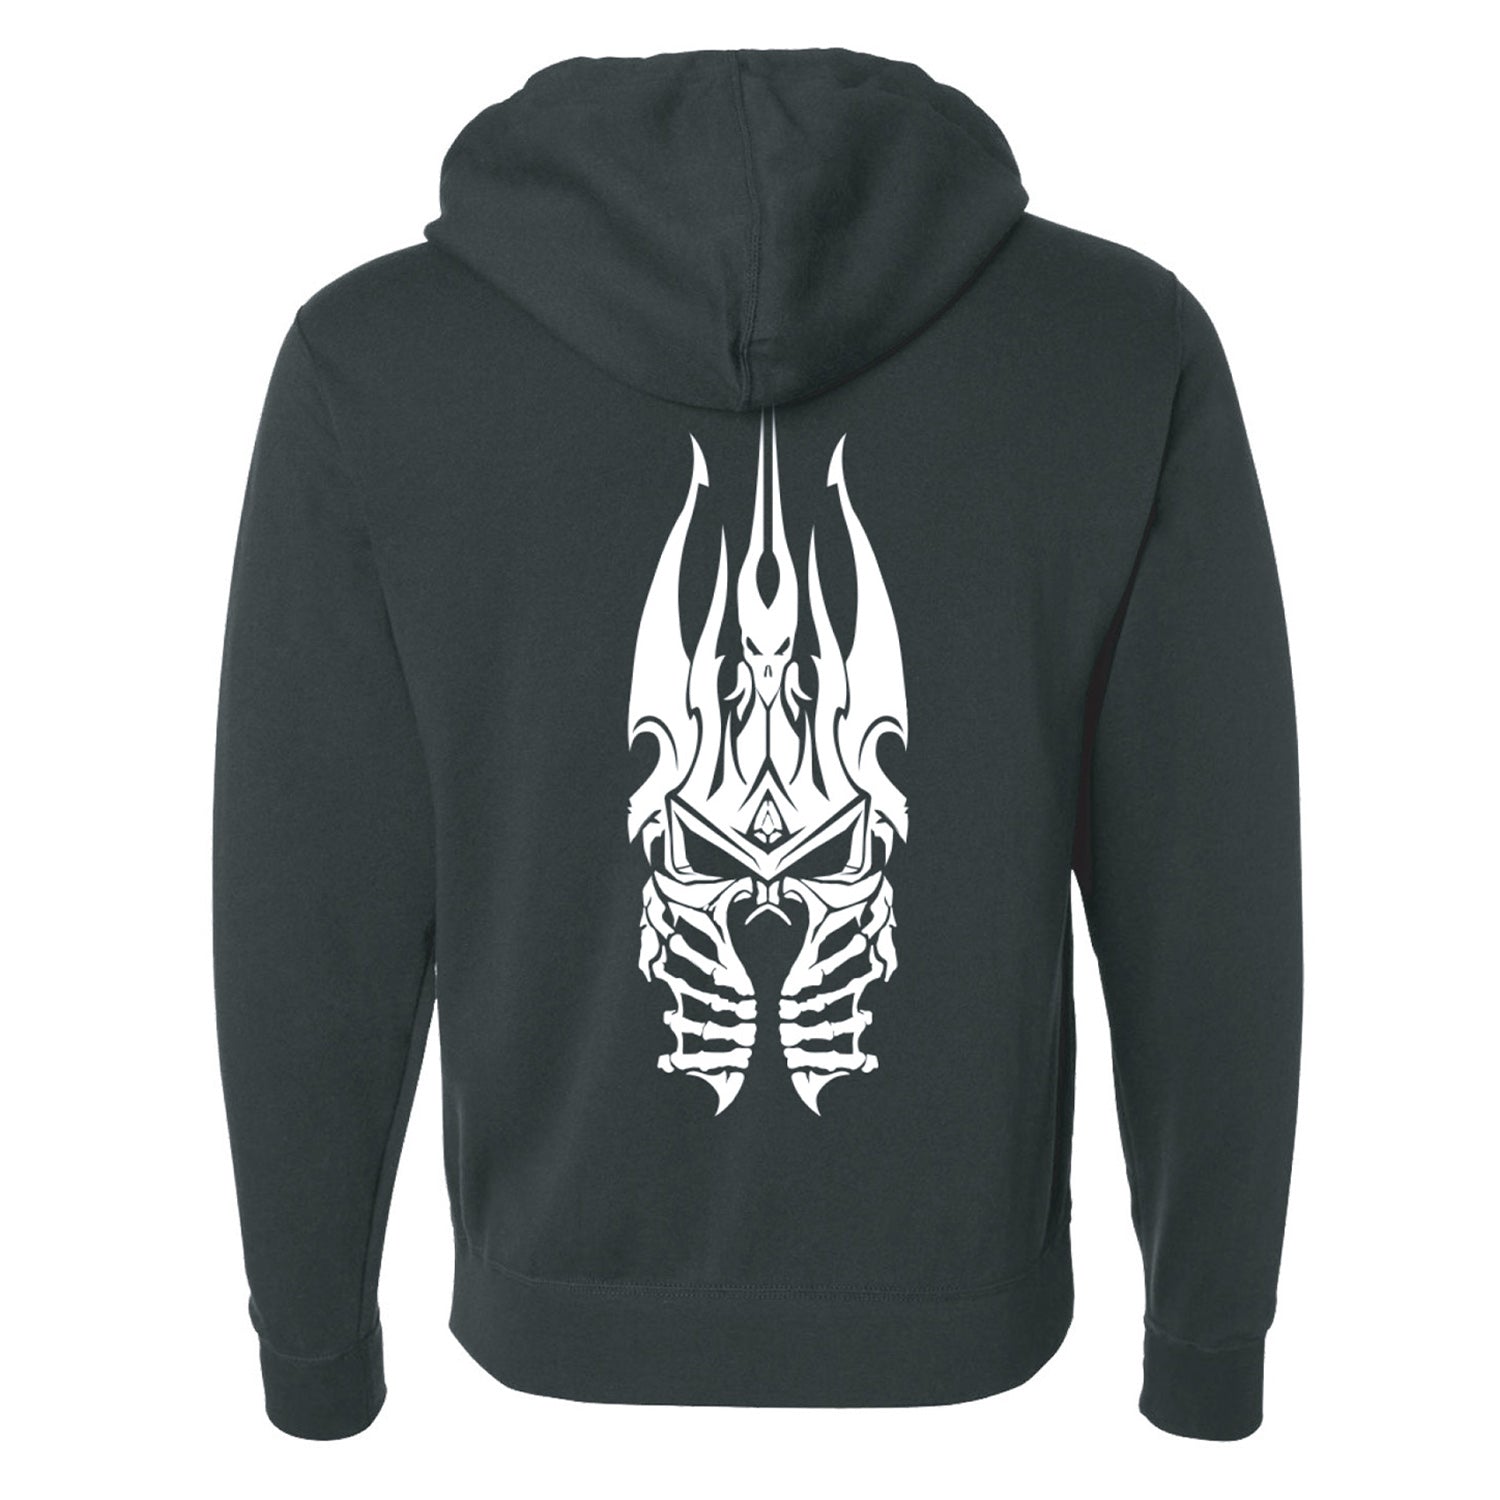 World of Warcraft Wrath of the Lich King Helm Hoodie - Back View Black Version